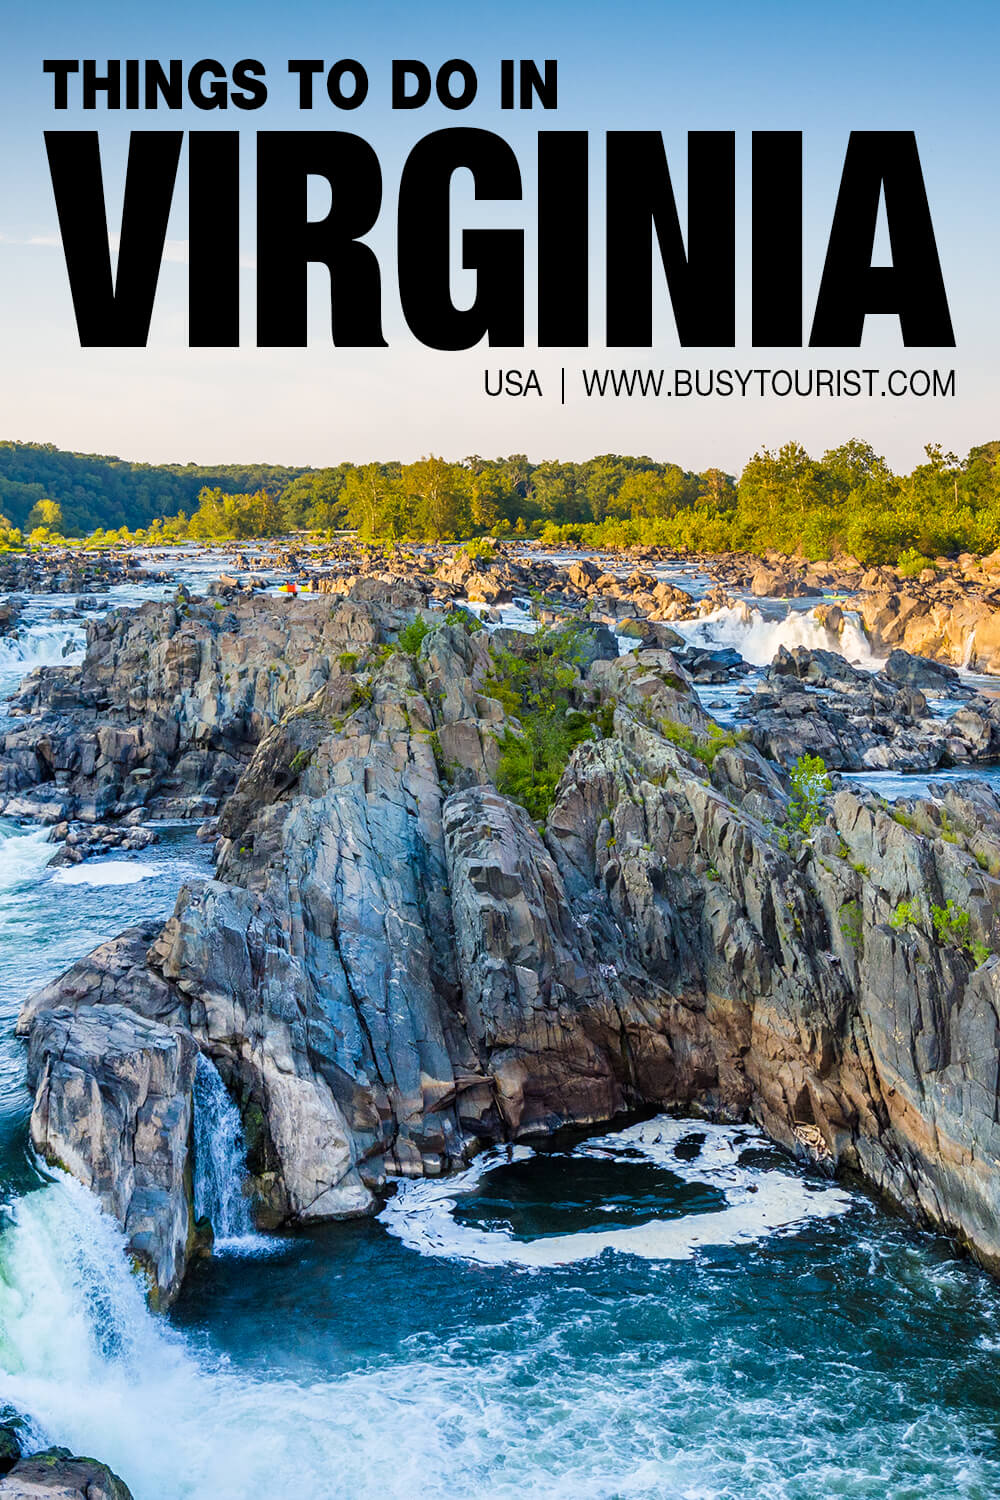 what are some interesting tourist attractions in virginia